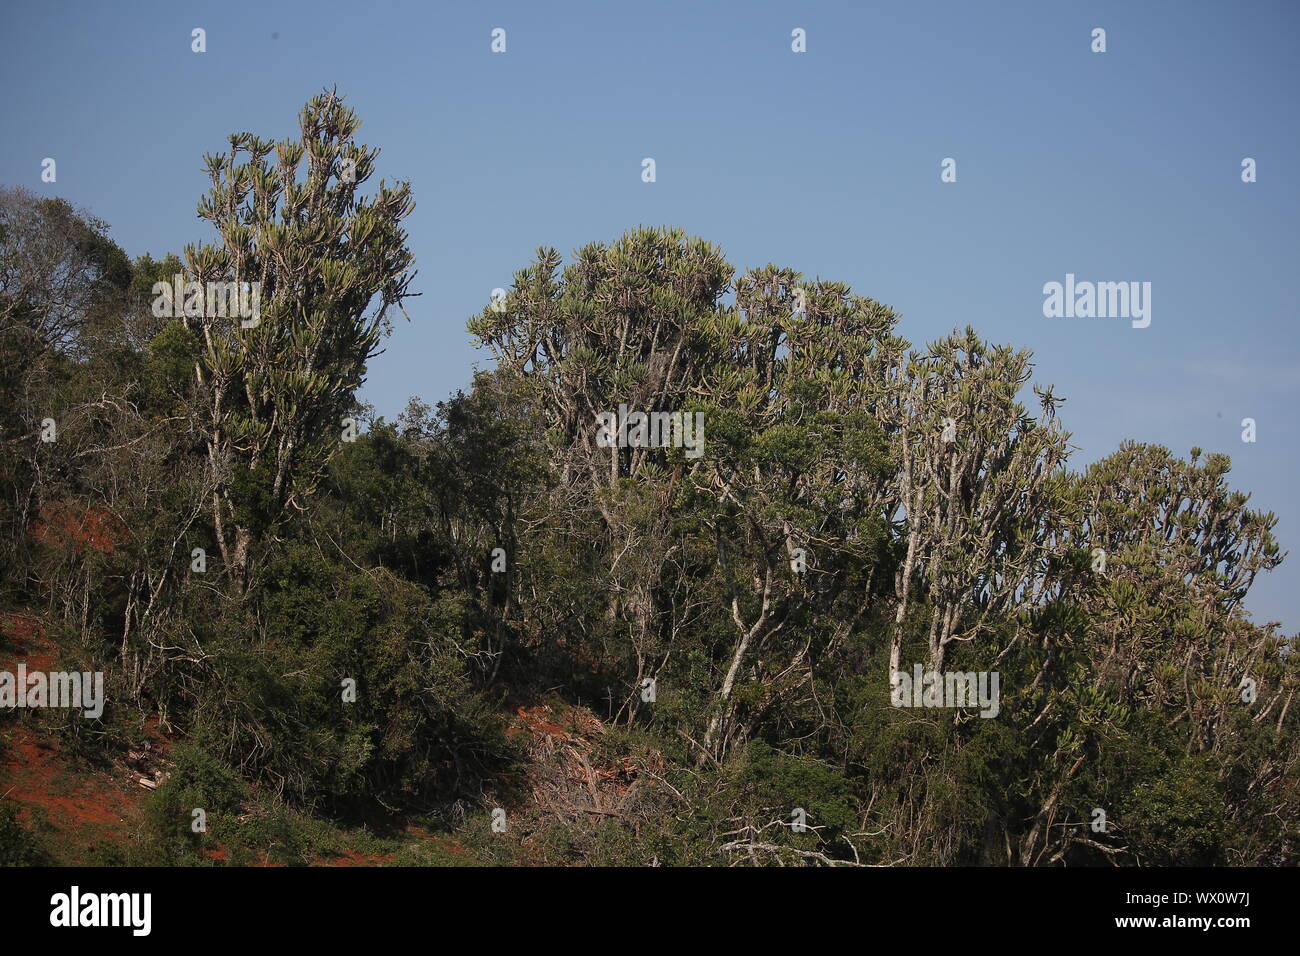 Tree vegetation at Addo Elephant National Park, Eastern Cape, South Africa Stock Photo